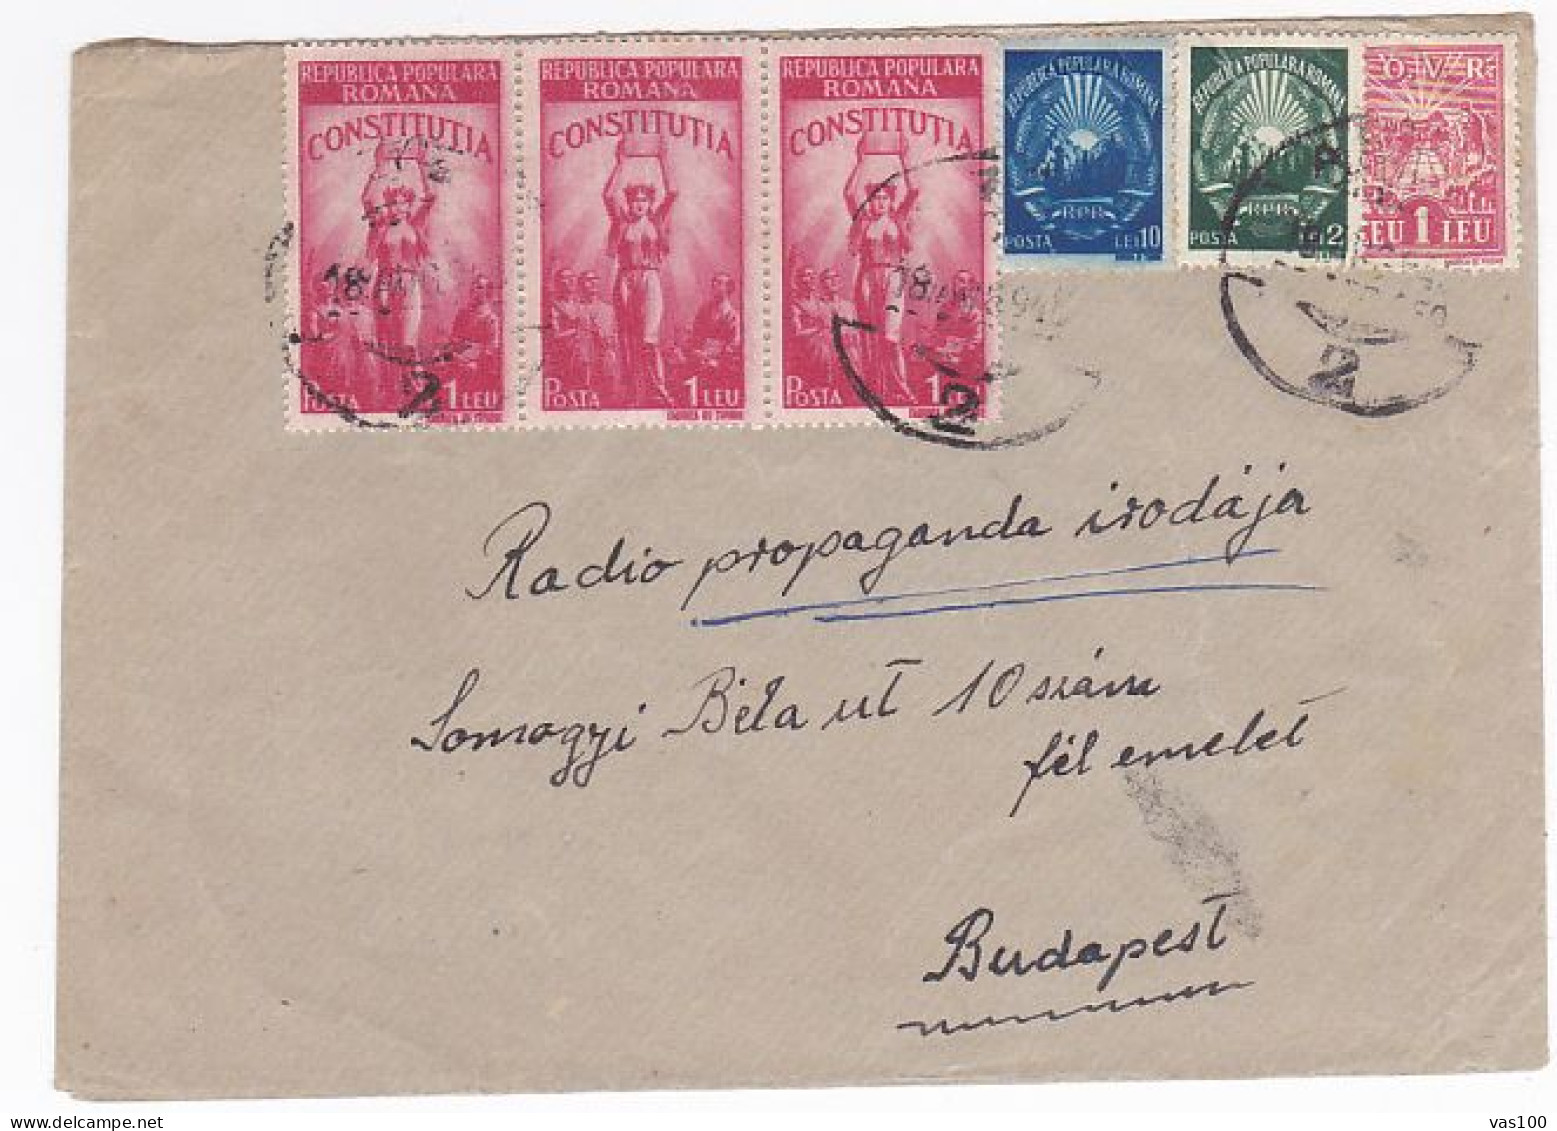 REVENUE STAMP, CONSTITUTION, REPUBLIC COAT OF ARMS, STAMPS ON COVER, 1948, ROMANIA - Fiscali